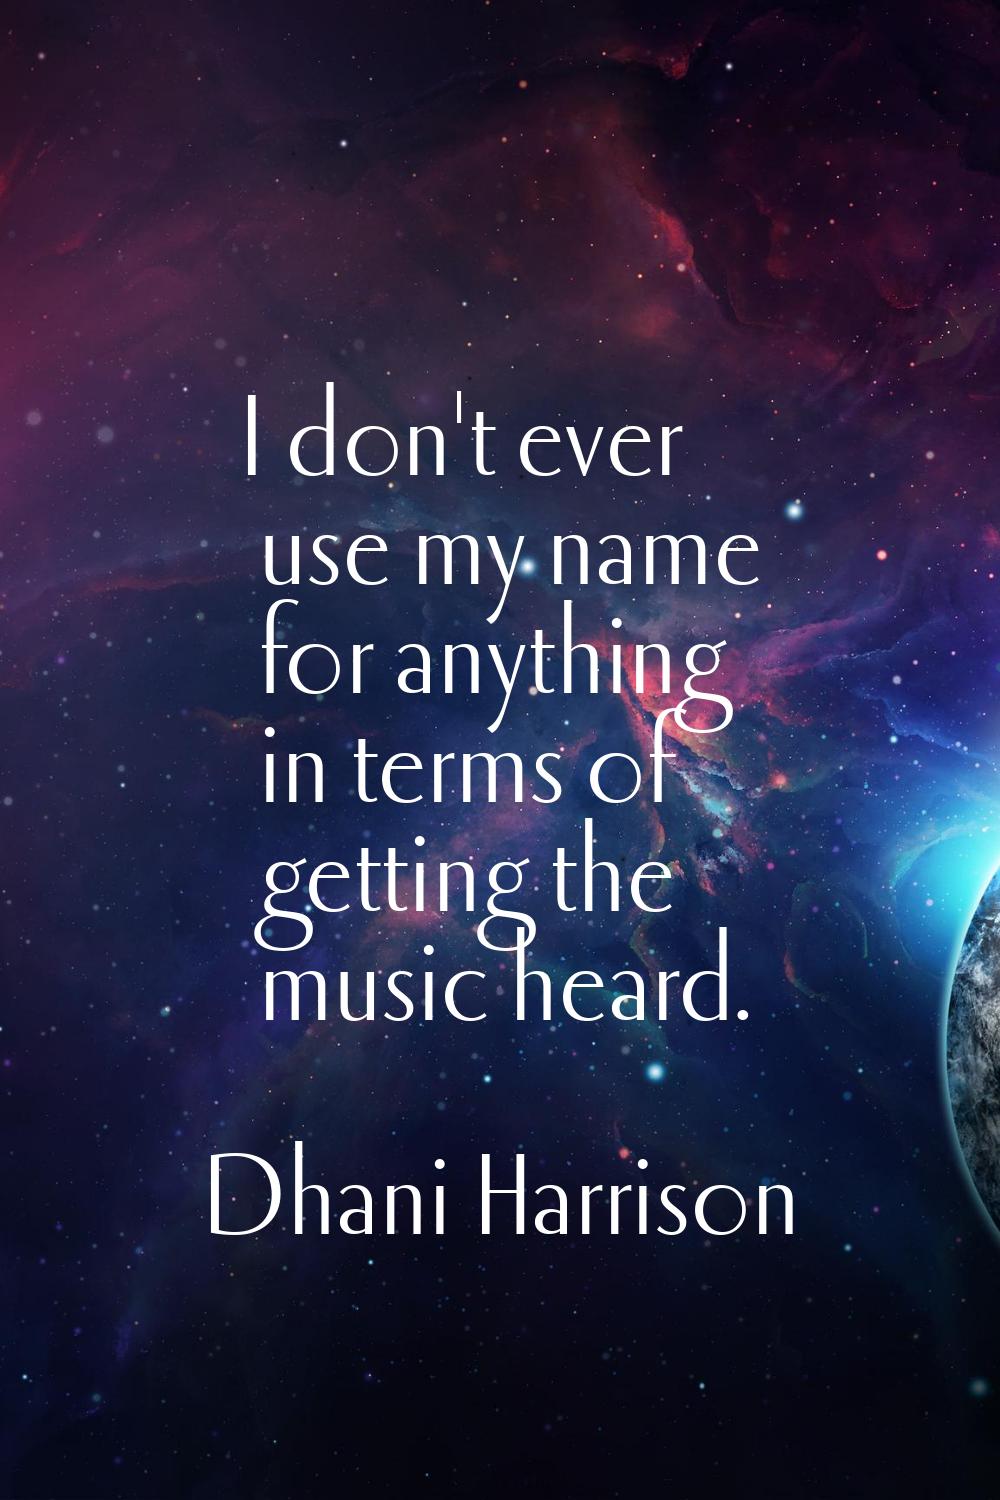 I don't ever use my name for anything in terms of getting the music heard.